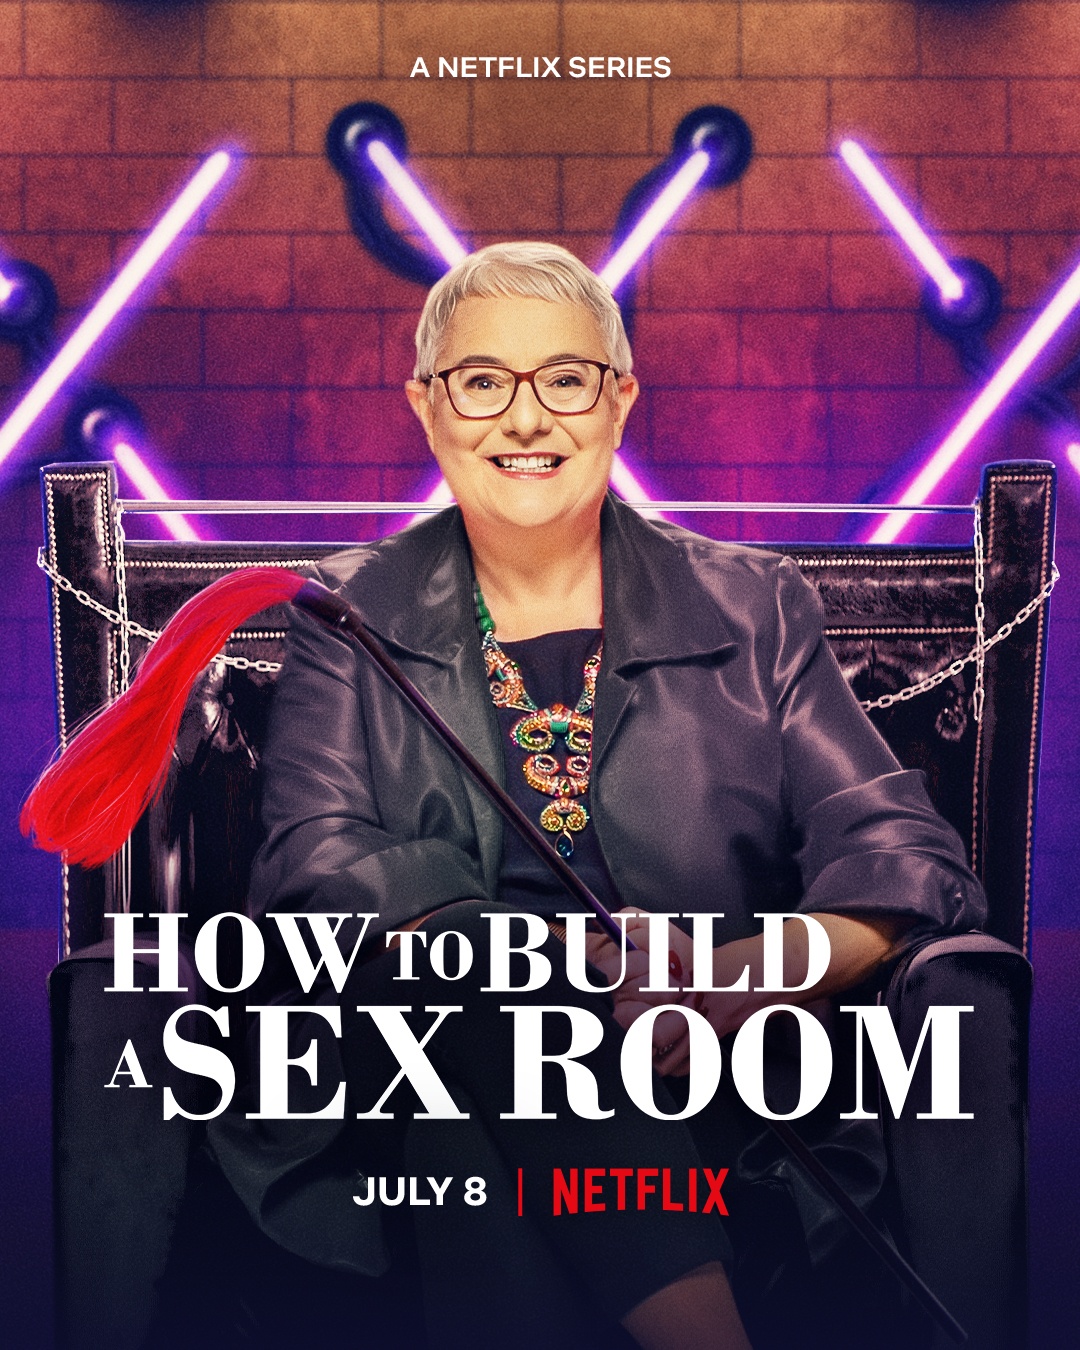 New Series: Netflix’s ‘How To Build A Sex Room’